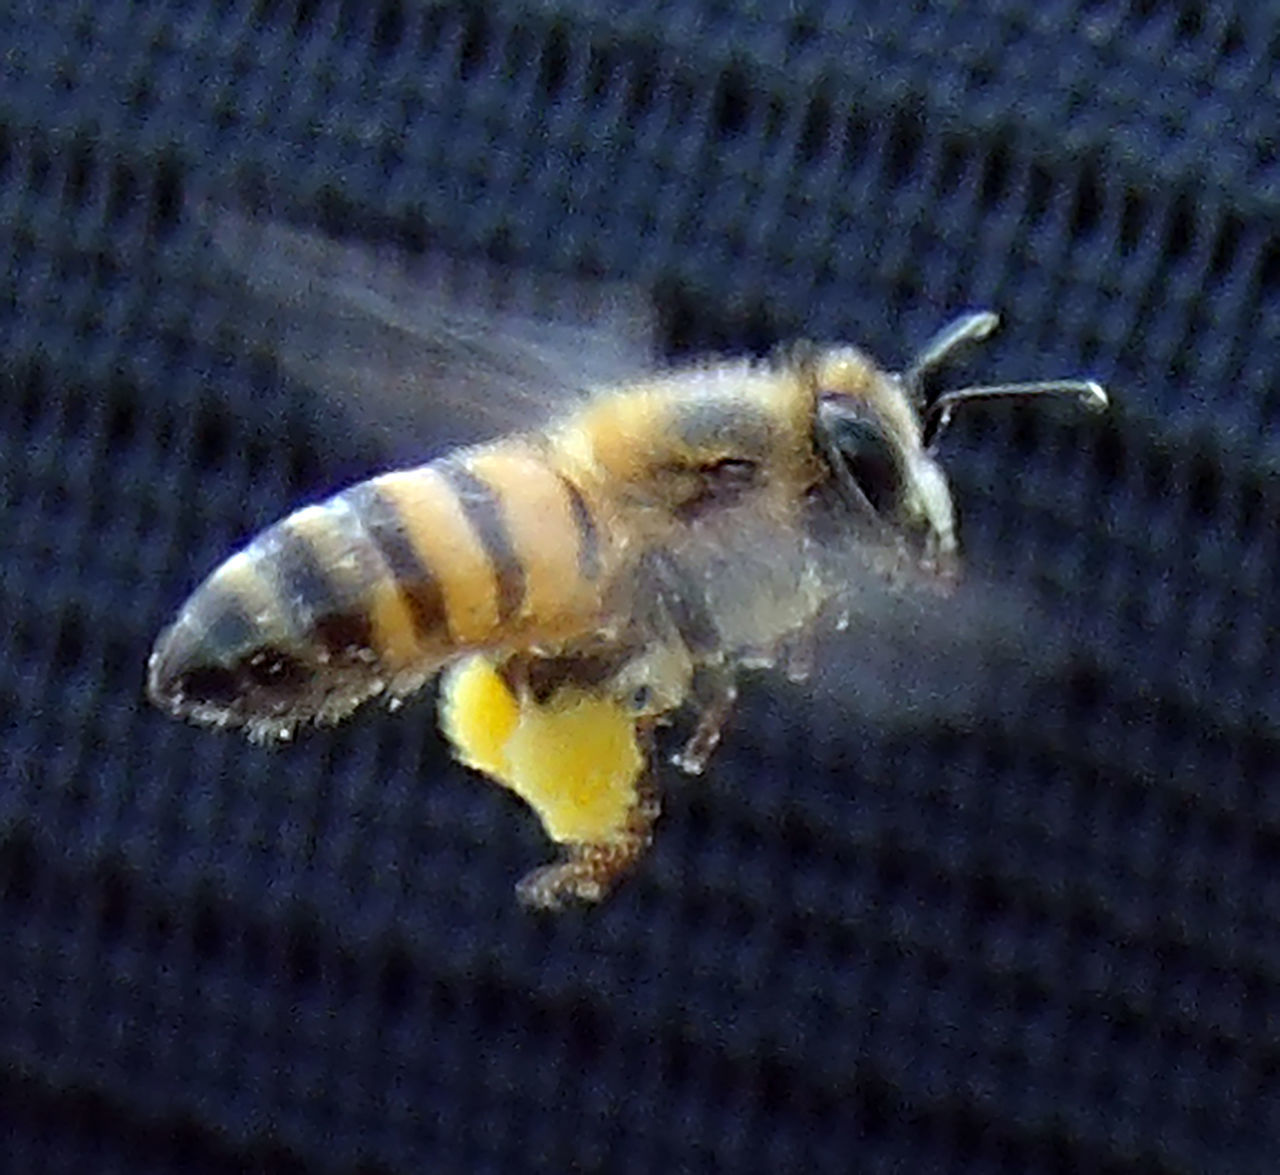 CLOSE-UP OF BEE ON THE SEA